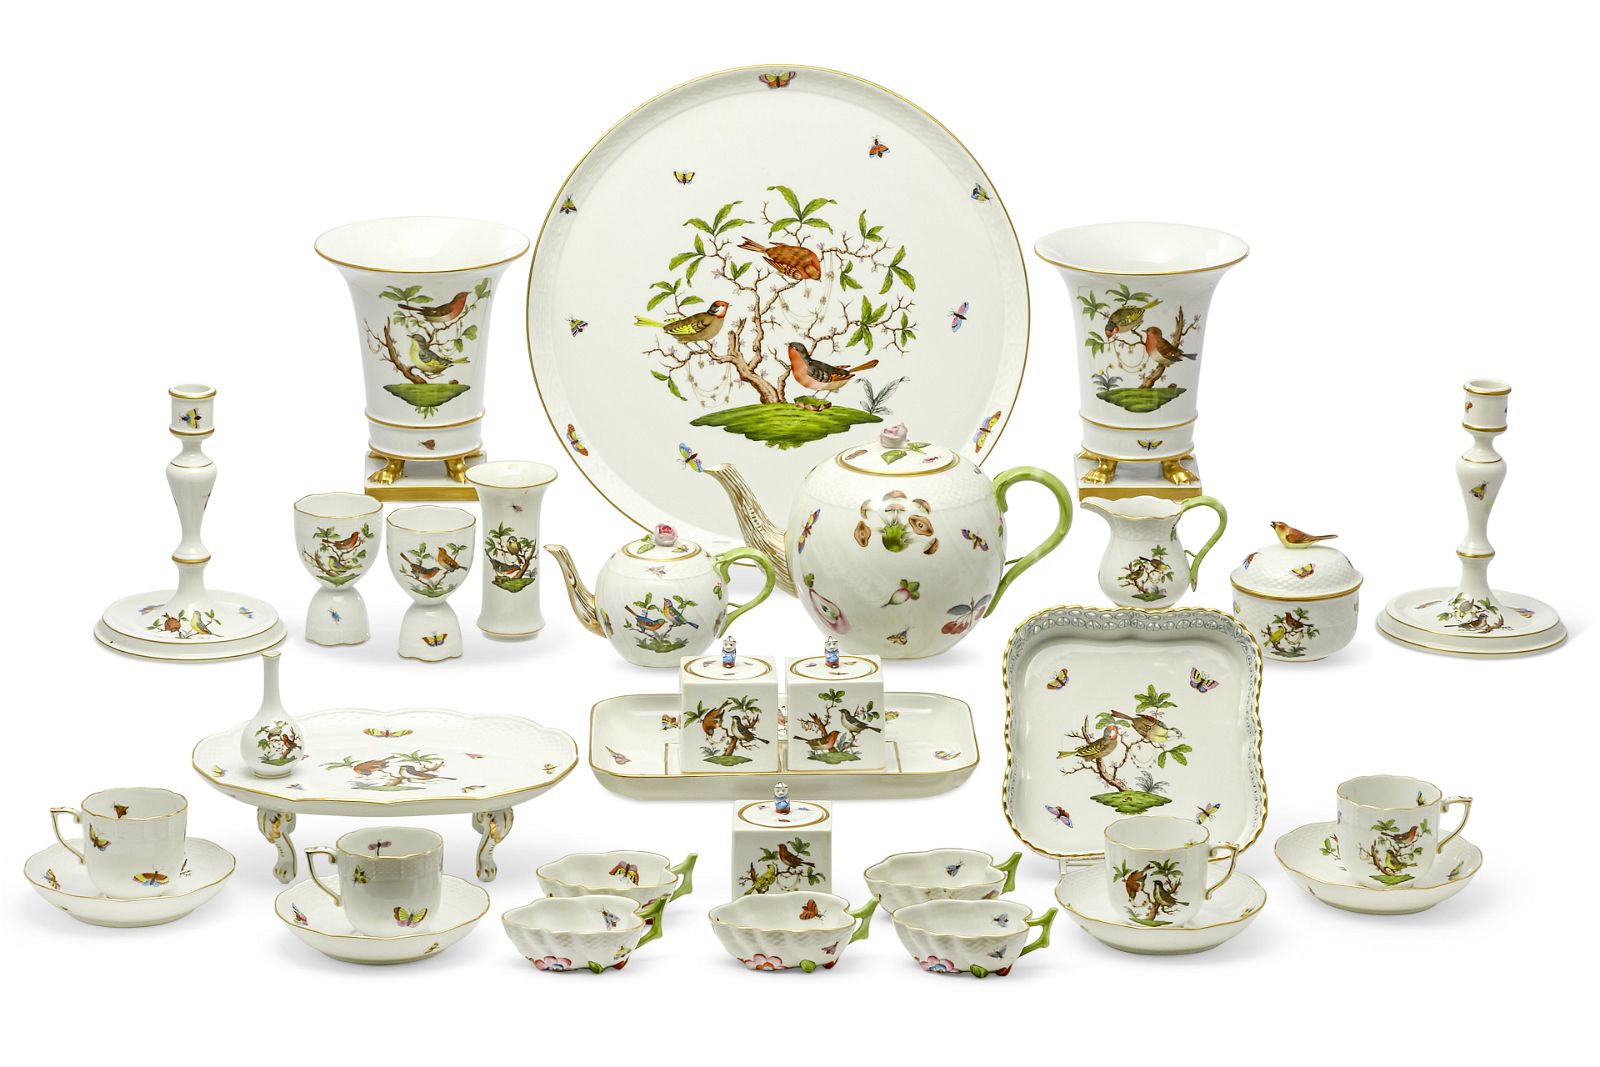 A COLLECTION OF HEREND PORCELAIN